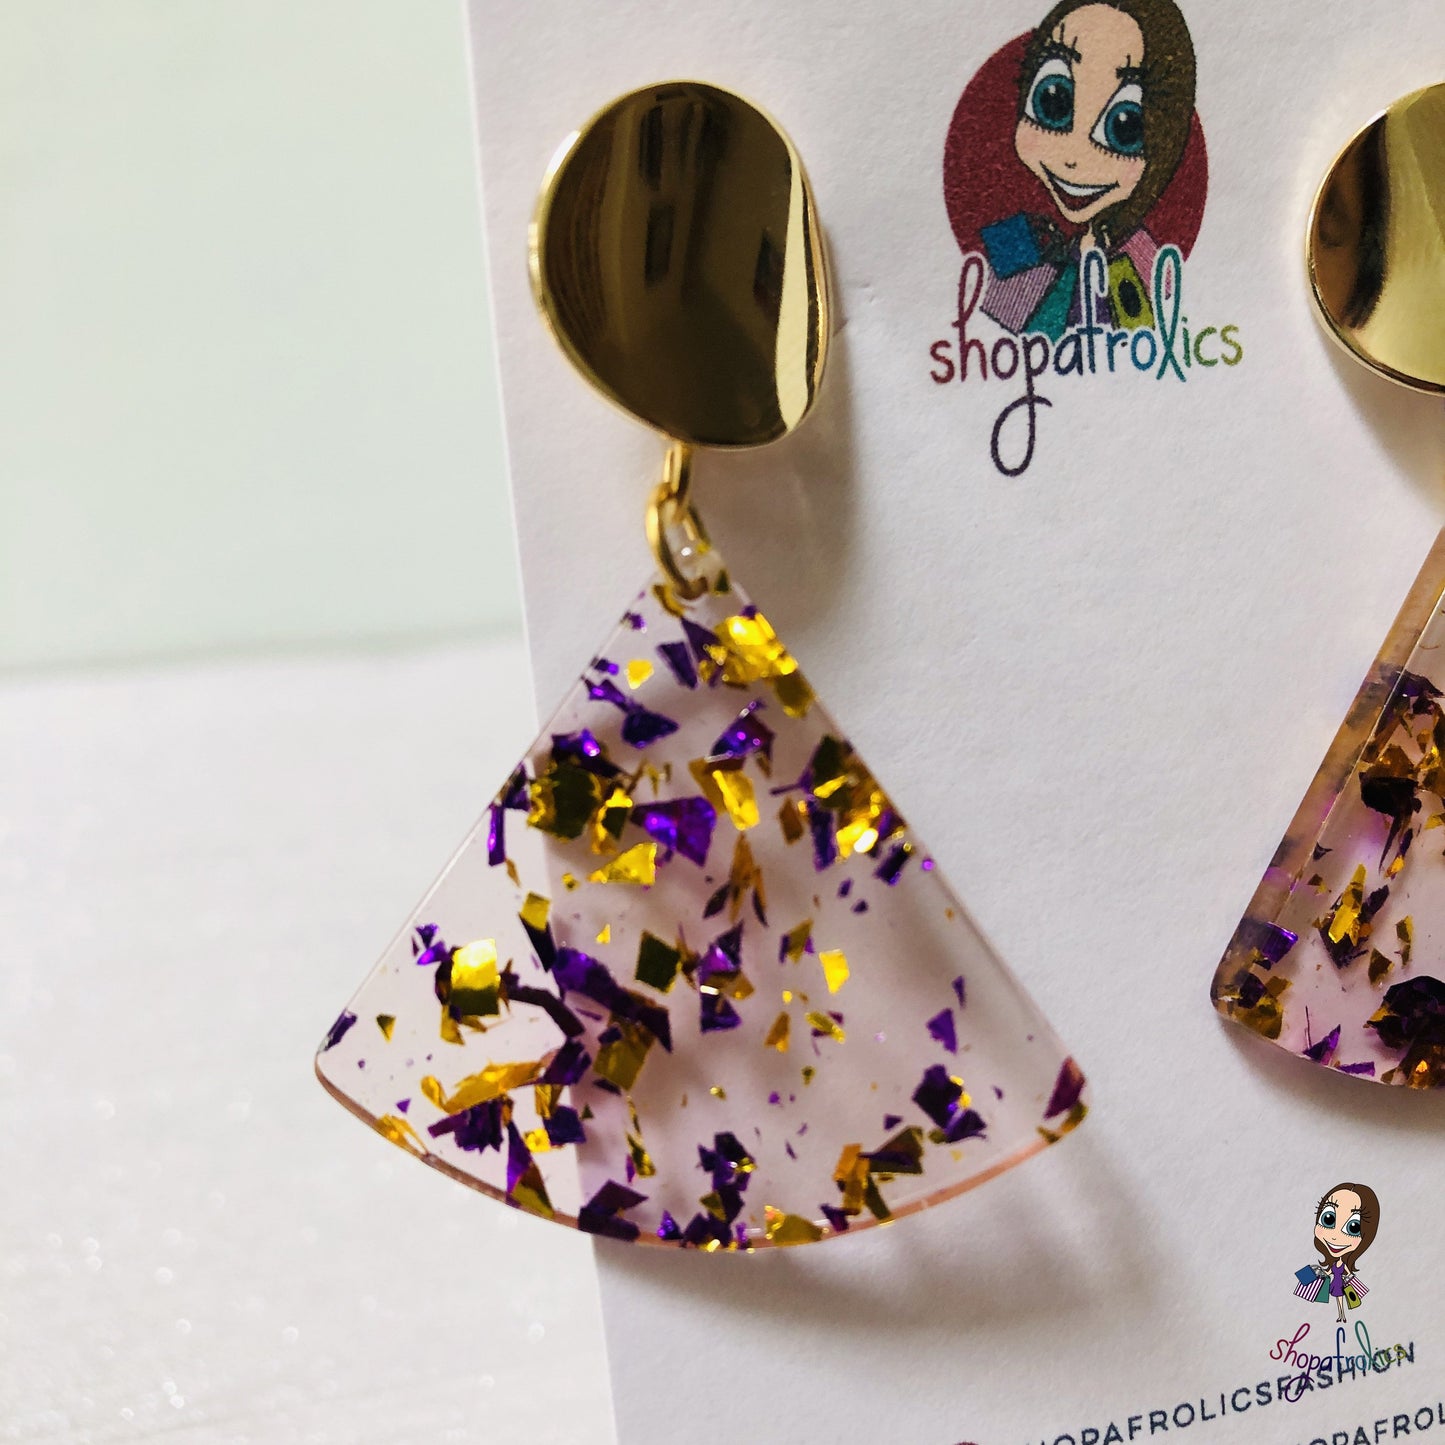 A gold and purple confetti effect, in a clear fan adds the statement to these drop earrings